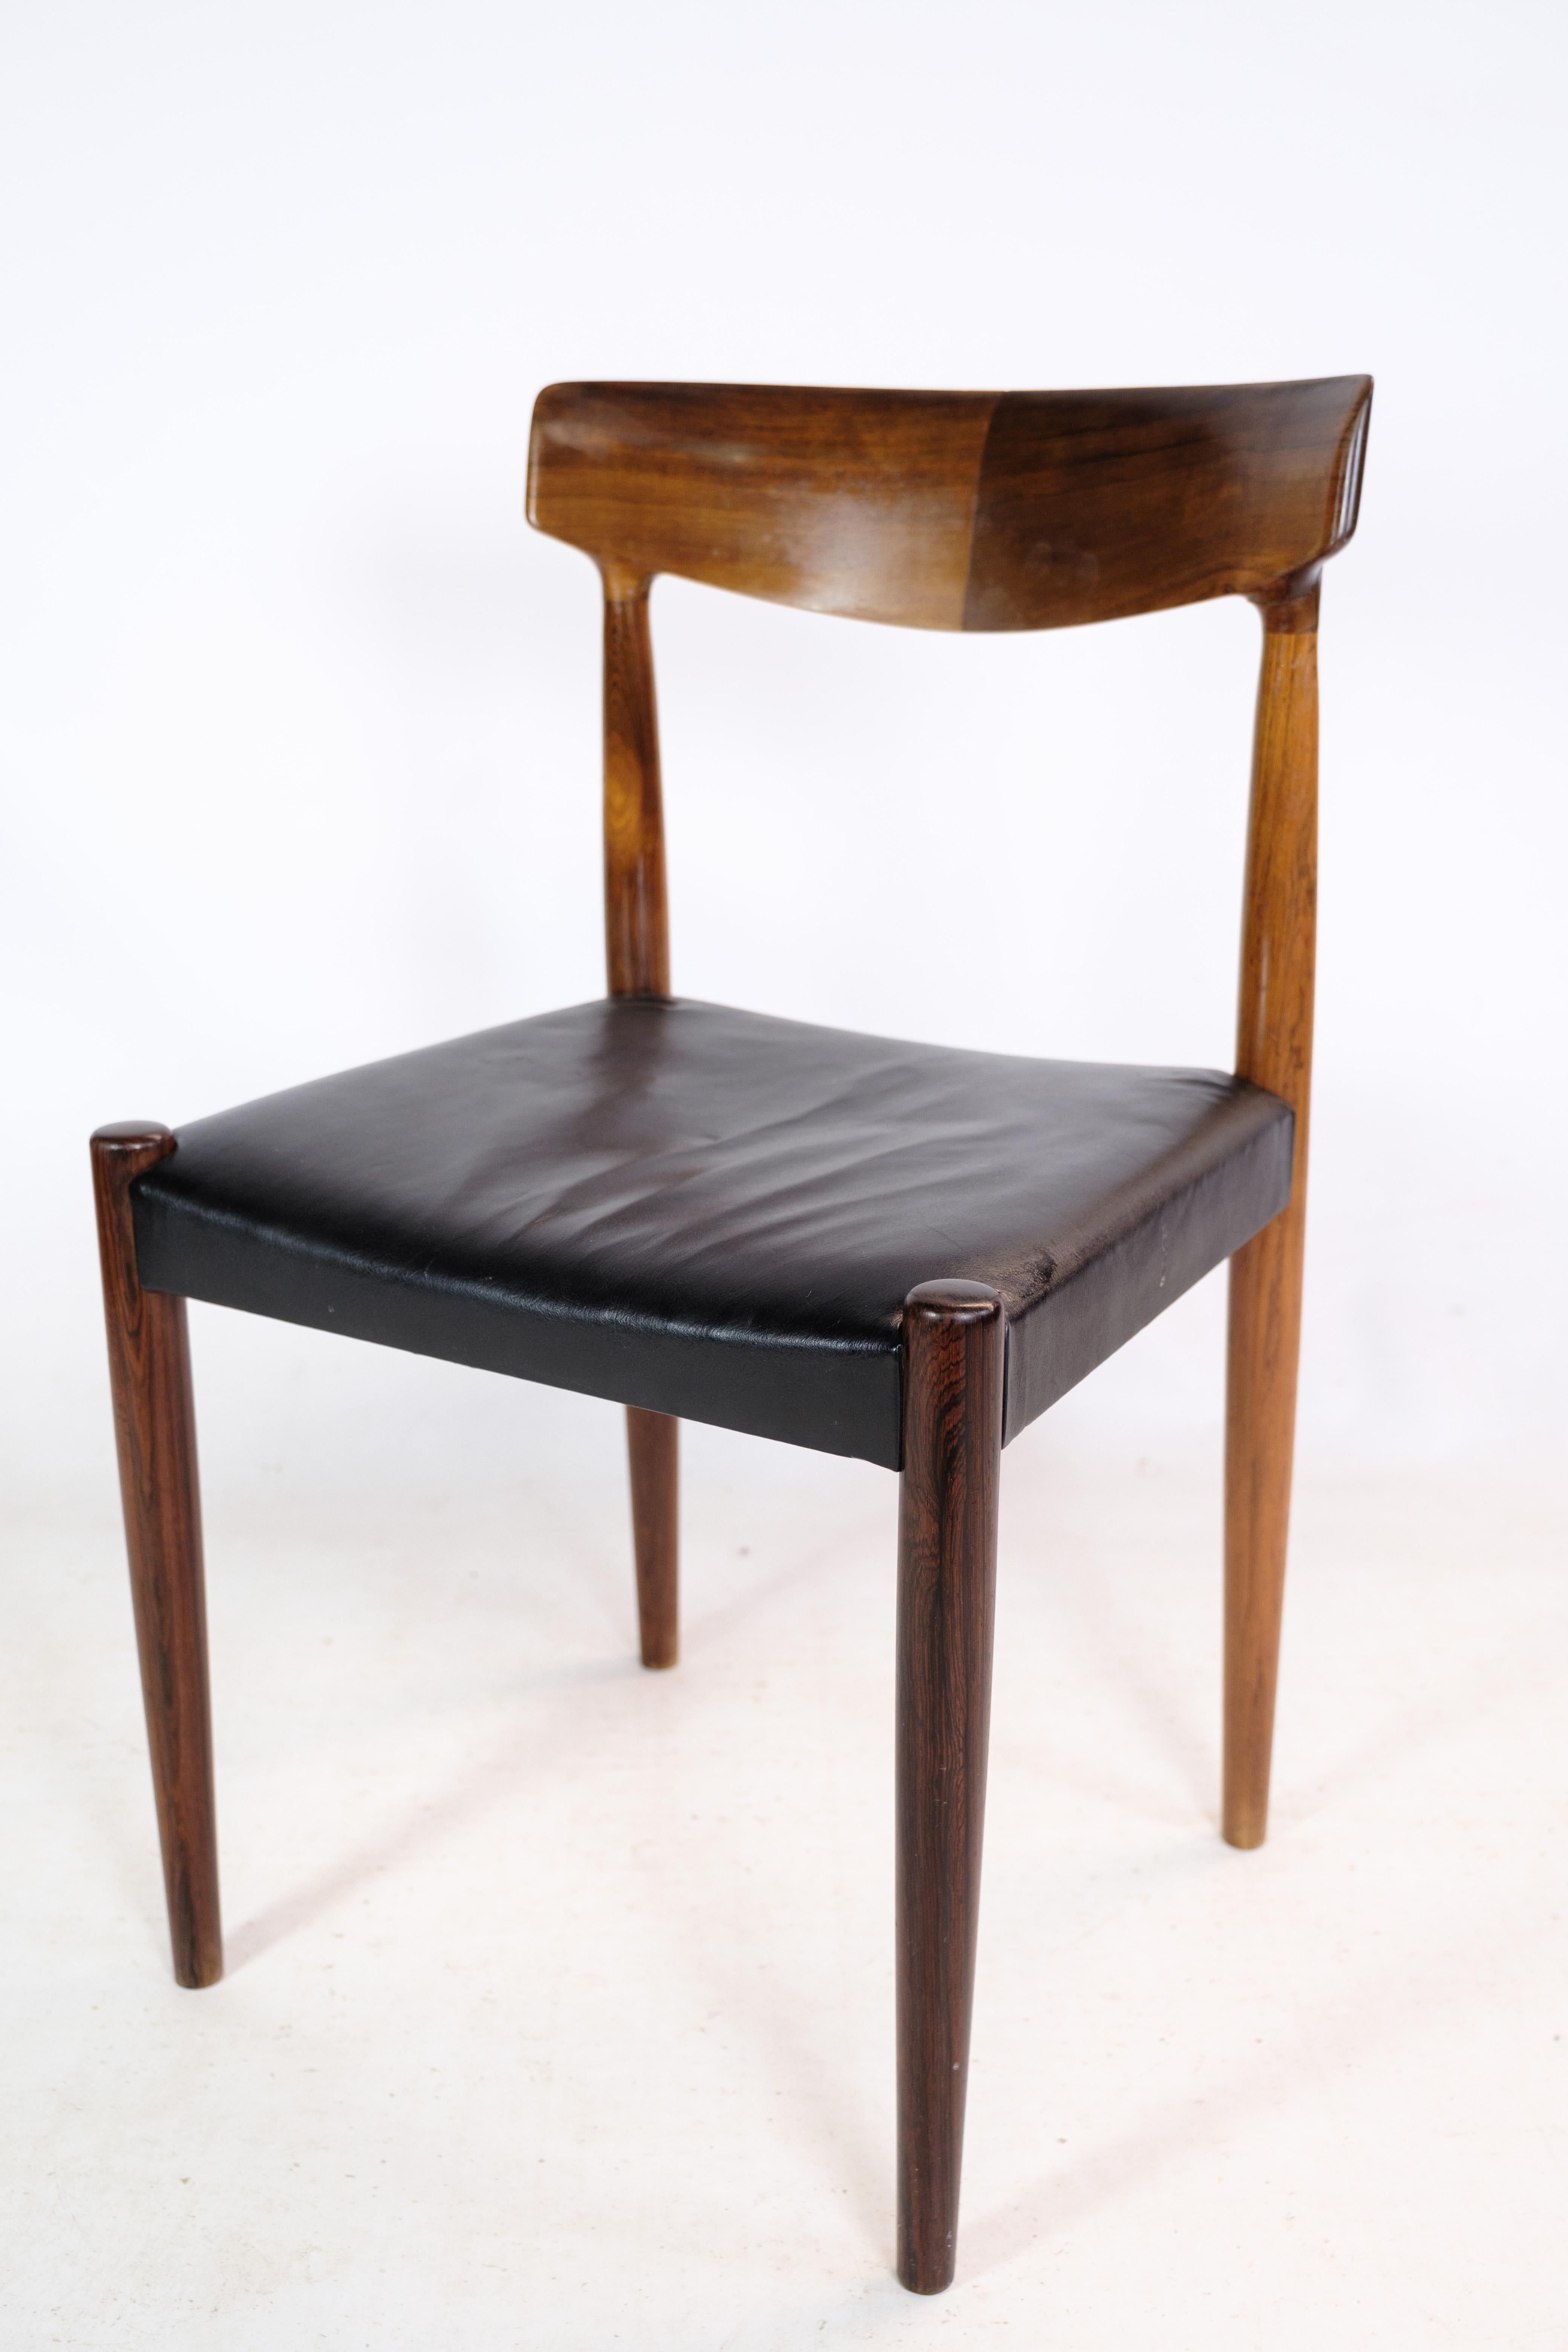 Set of 8 dining chairs, model 343, designed by Knud Færch and produced by Slagelse møbelfabrik from around the 1960s. Stands with used black leather. We have the option of reupholstering the chairs in both leather and fabric as